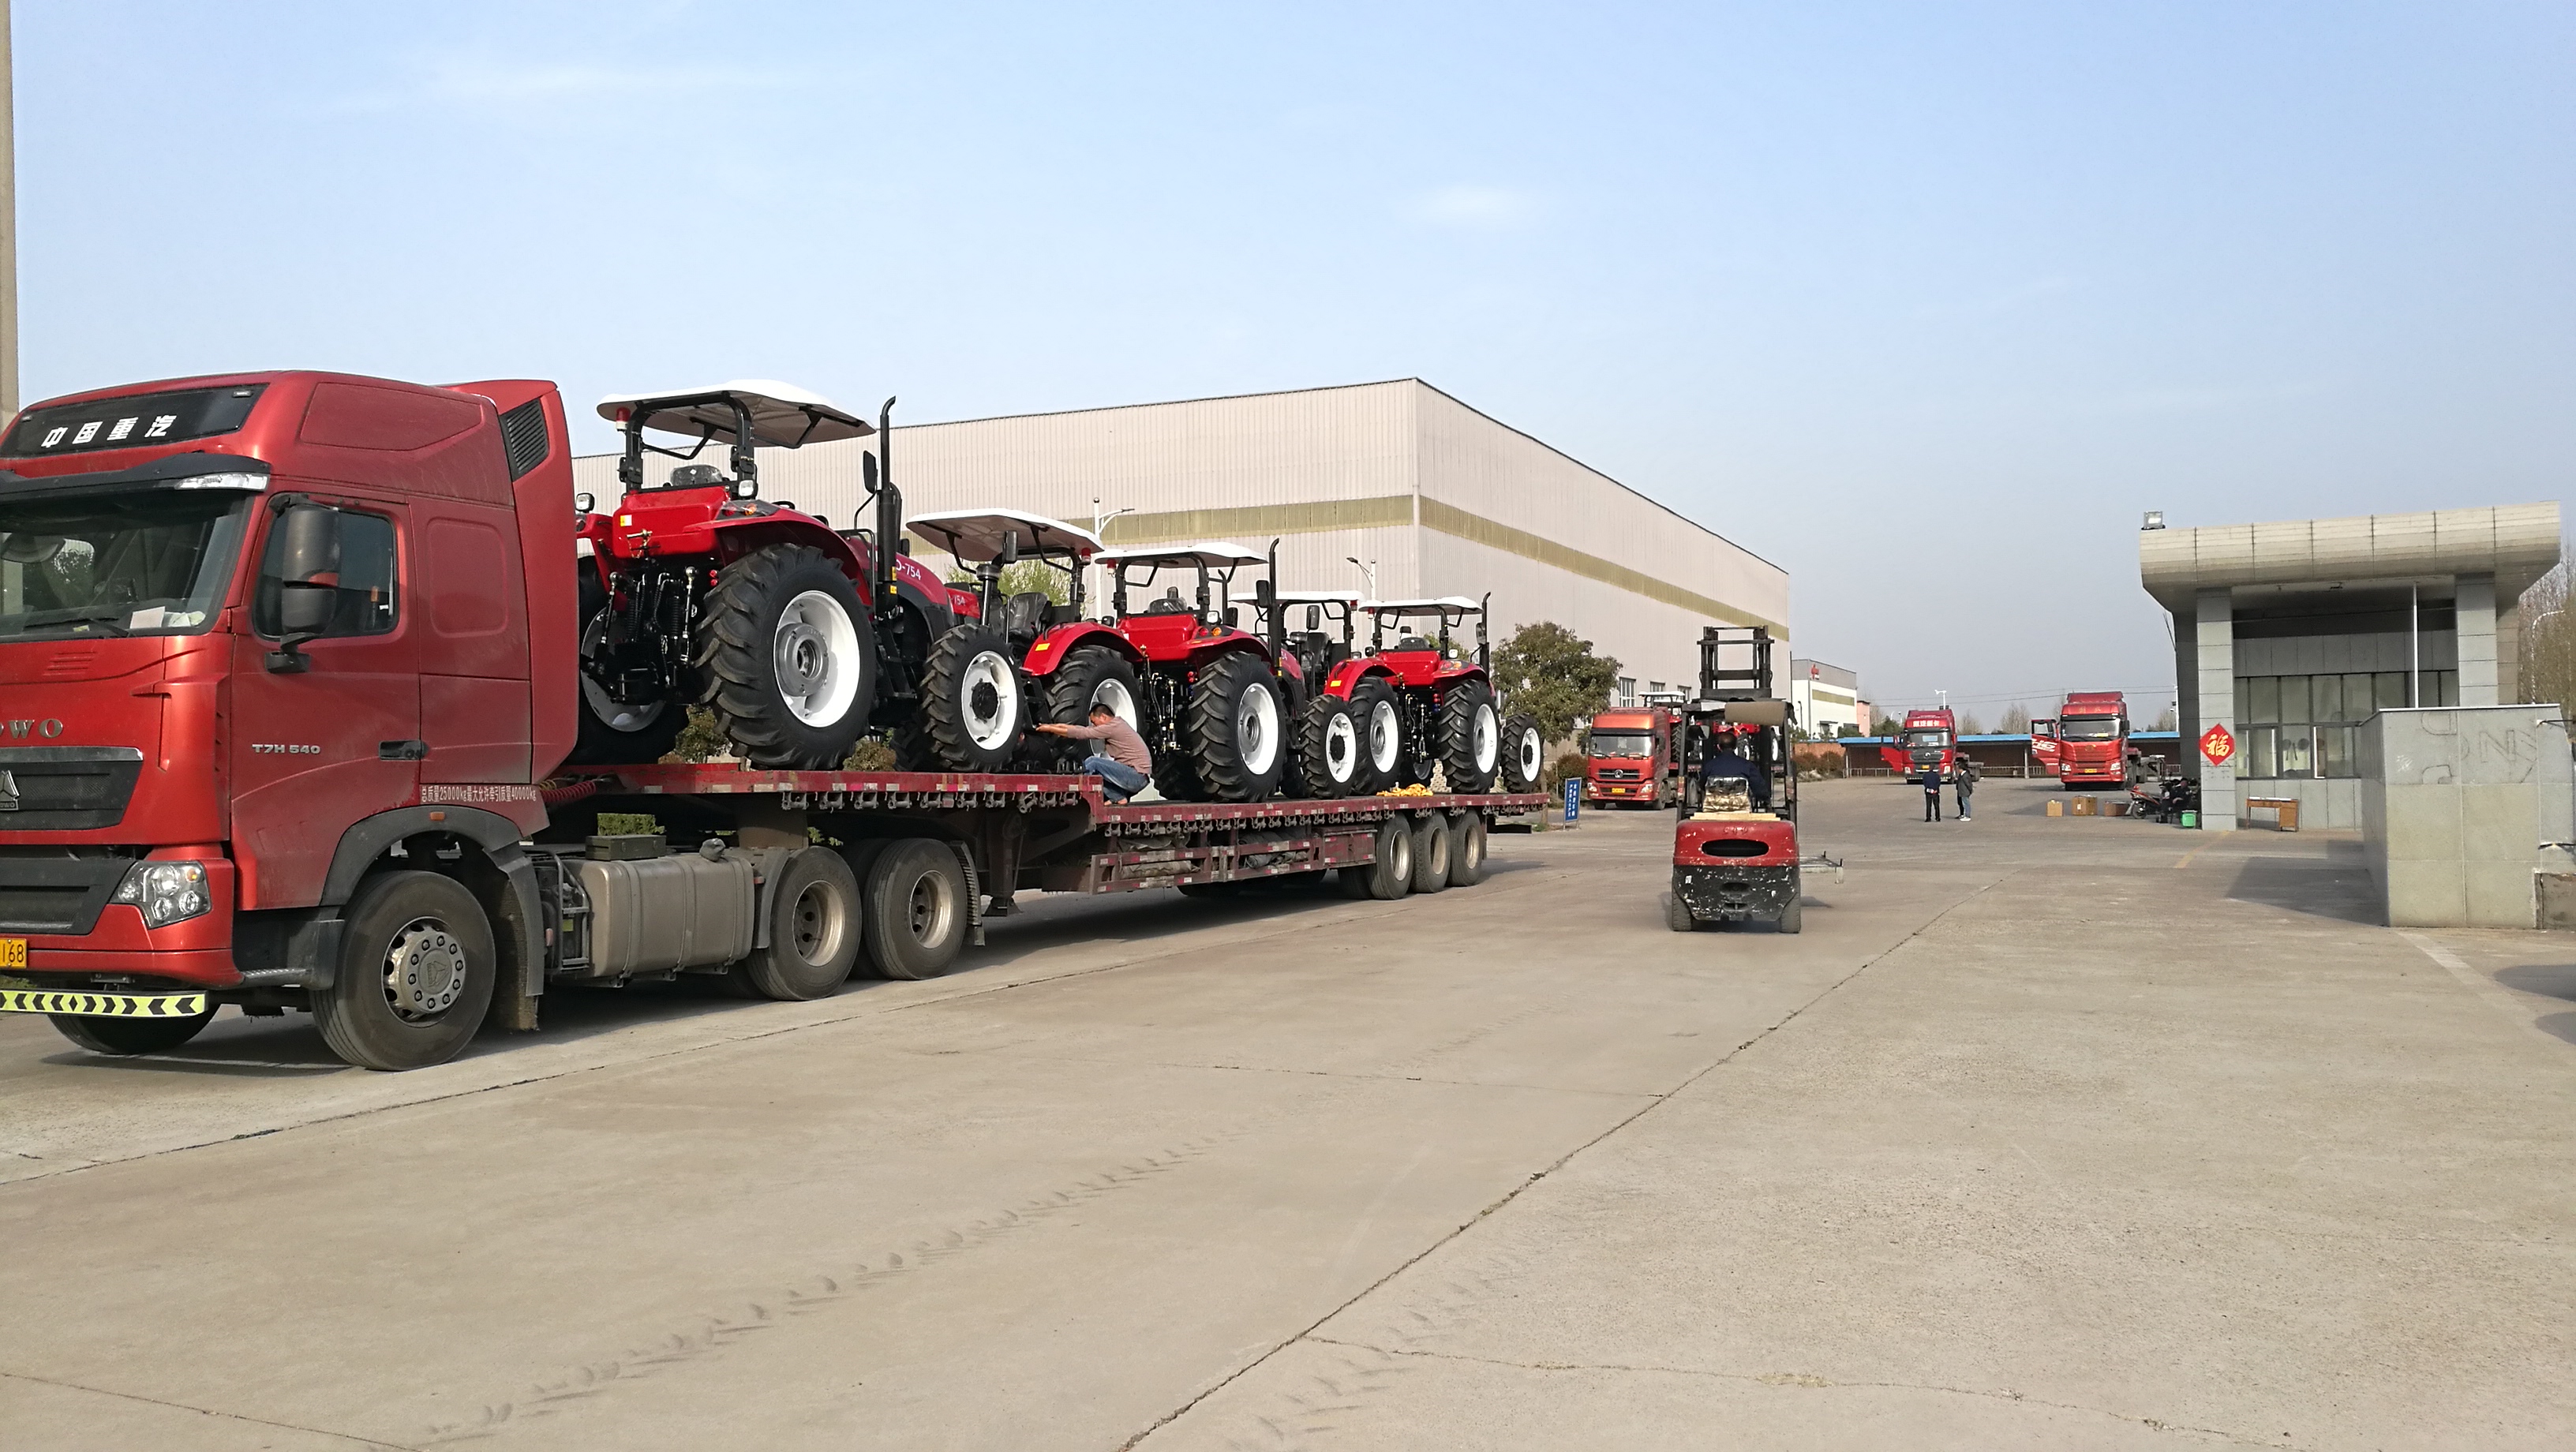 paddy field tractor to oversea partners